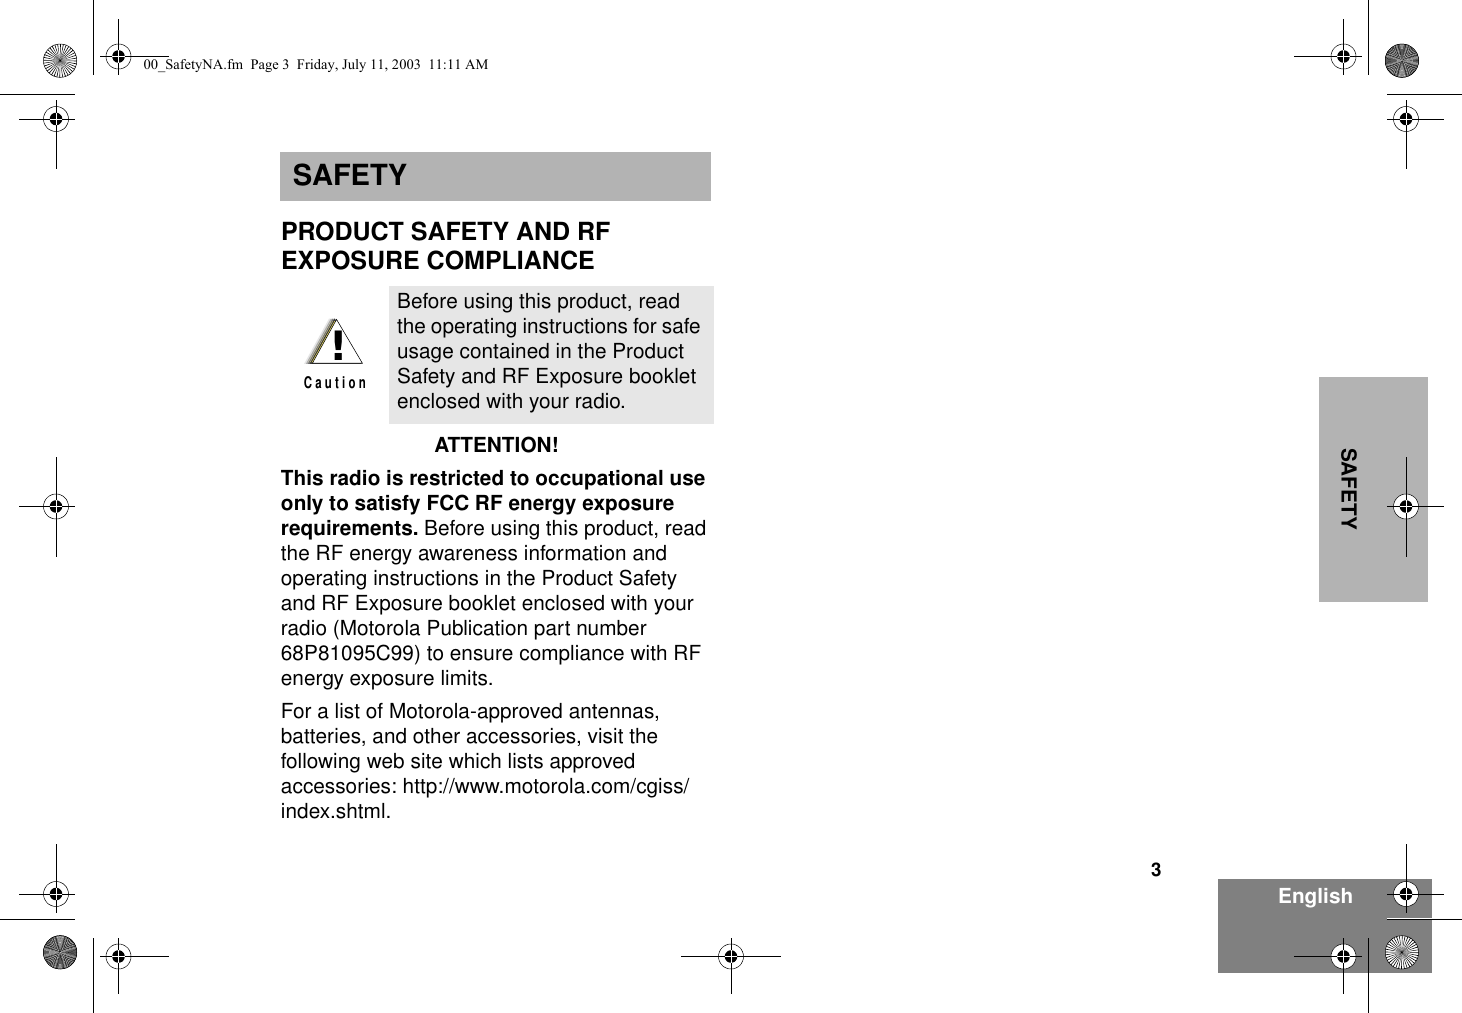 3EnglishSAFETYSAFETYPRODUCT SAFETY AND RF EXPOSURE COMPLIANCEATTENTION!  This radio is restricted to occupational use only to satisfy FCC RF energy exposure requirements. Before using this product, read the RF energy awareness information and operating instructions in the Product Safety and RF Exposure booklet enclosed with your radio (Motorola Publication part number 68P81095C99) to ensure compliance with RF energy exposure limits.  For a list of Motorola-approved antennas, batteries, and other accessories, visit the following web site which lists approved accessories: http://www.motorola.com/cgiss/index.shtml.Before using this product, read the operating instructions for safe usage contained in the Product Safety and RF Exposure booklet enclosed with your radio.!C a u t i o n00_SafetyNA.fm  Page 3  Friday, July 11, 2003  11:11 AM